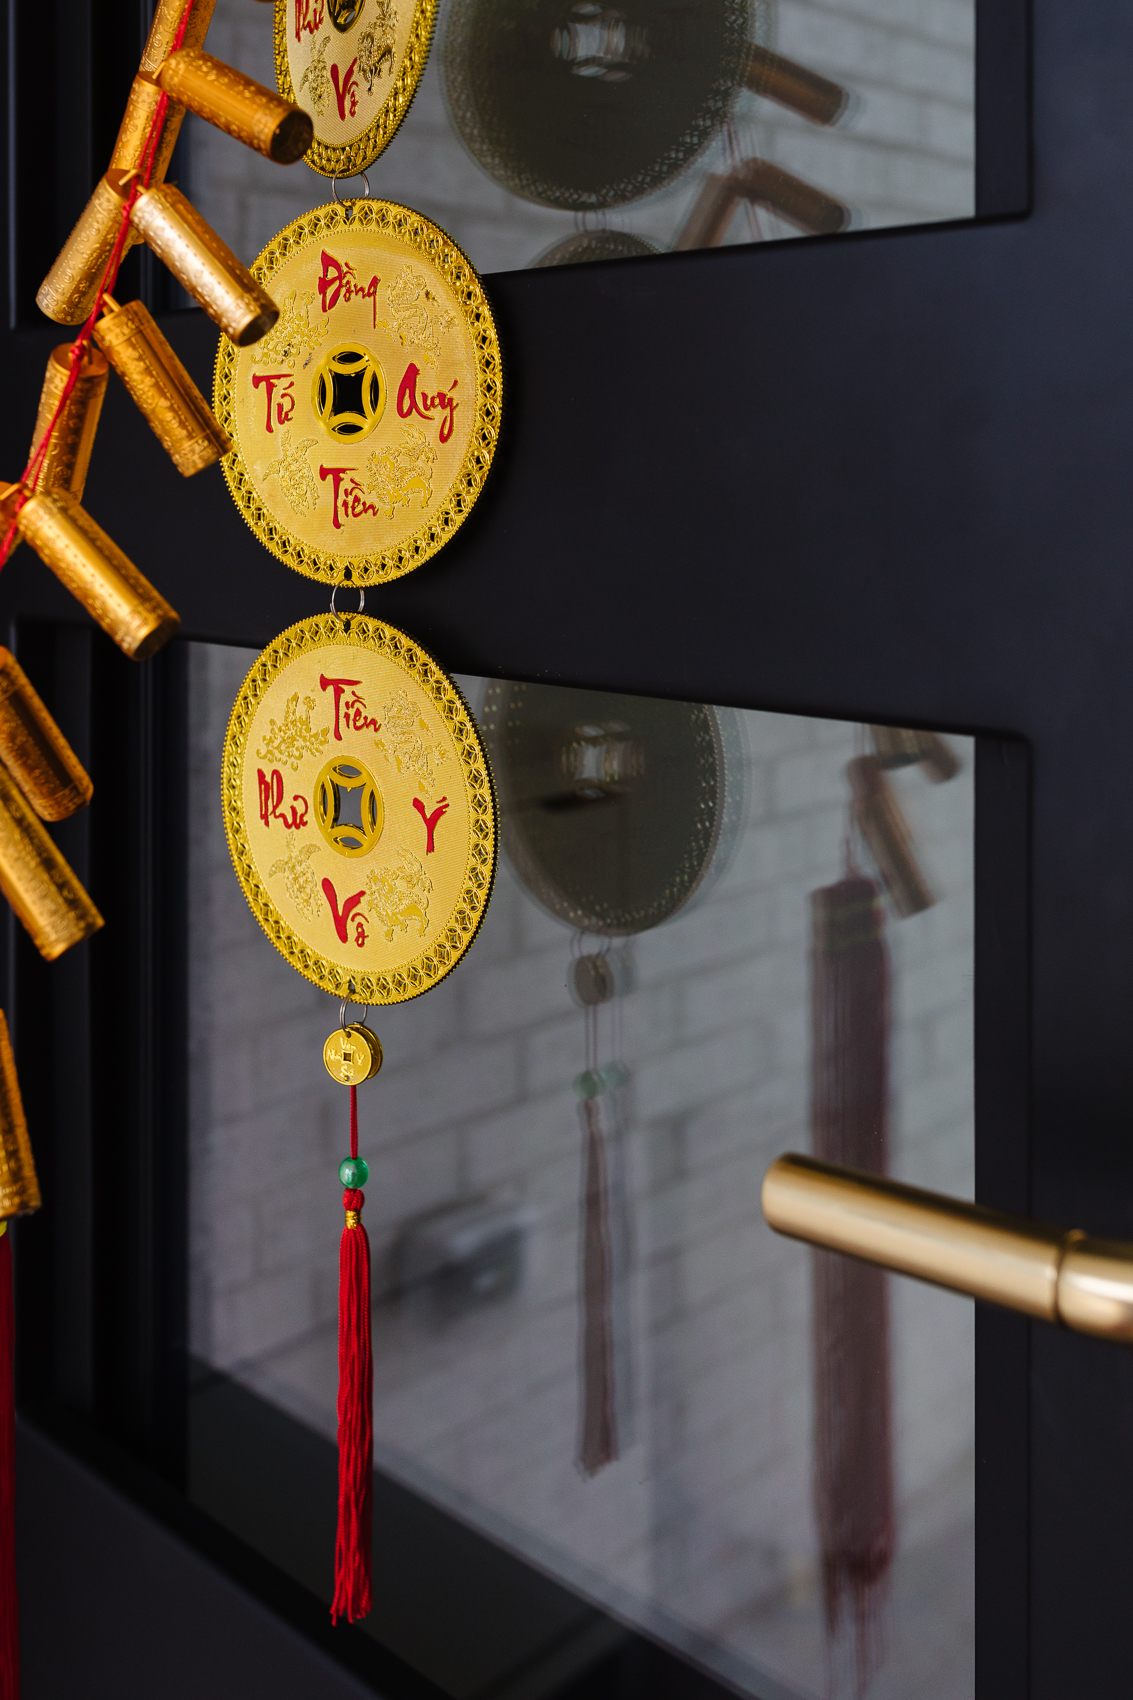 Gold coin decor and firecrackers to decorate the front door of a home for Lunar New Year or Tet Vietnamese New Year